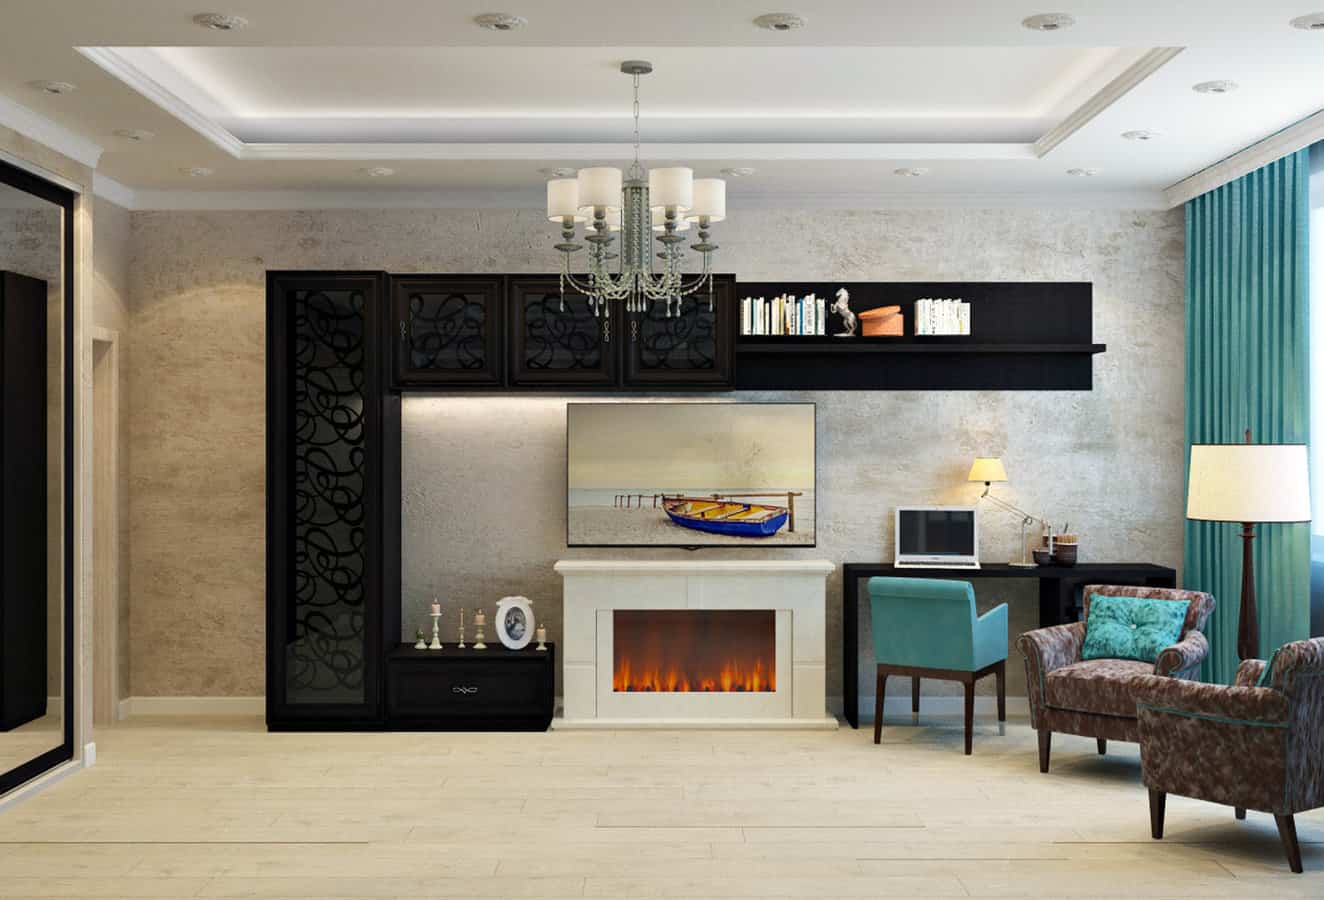 Gas Fireplace in a Room